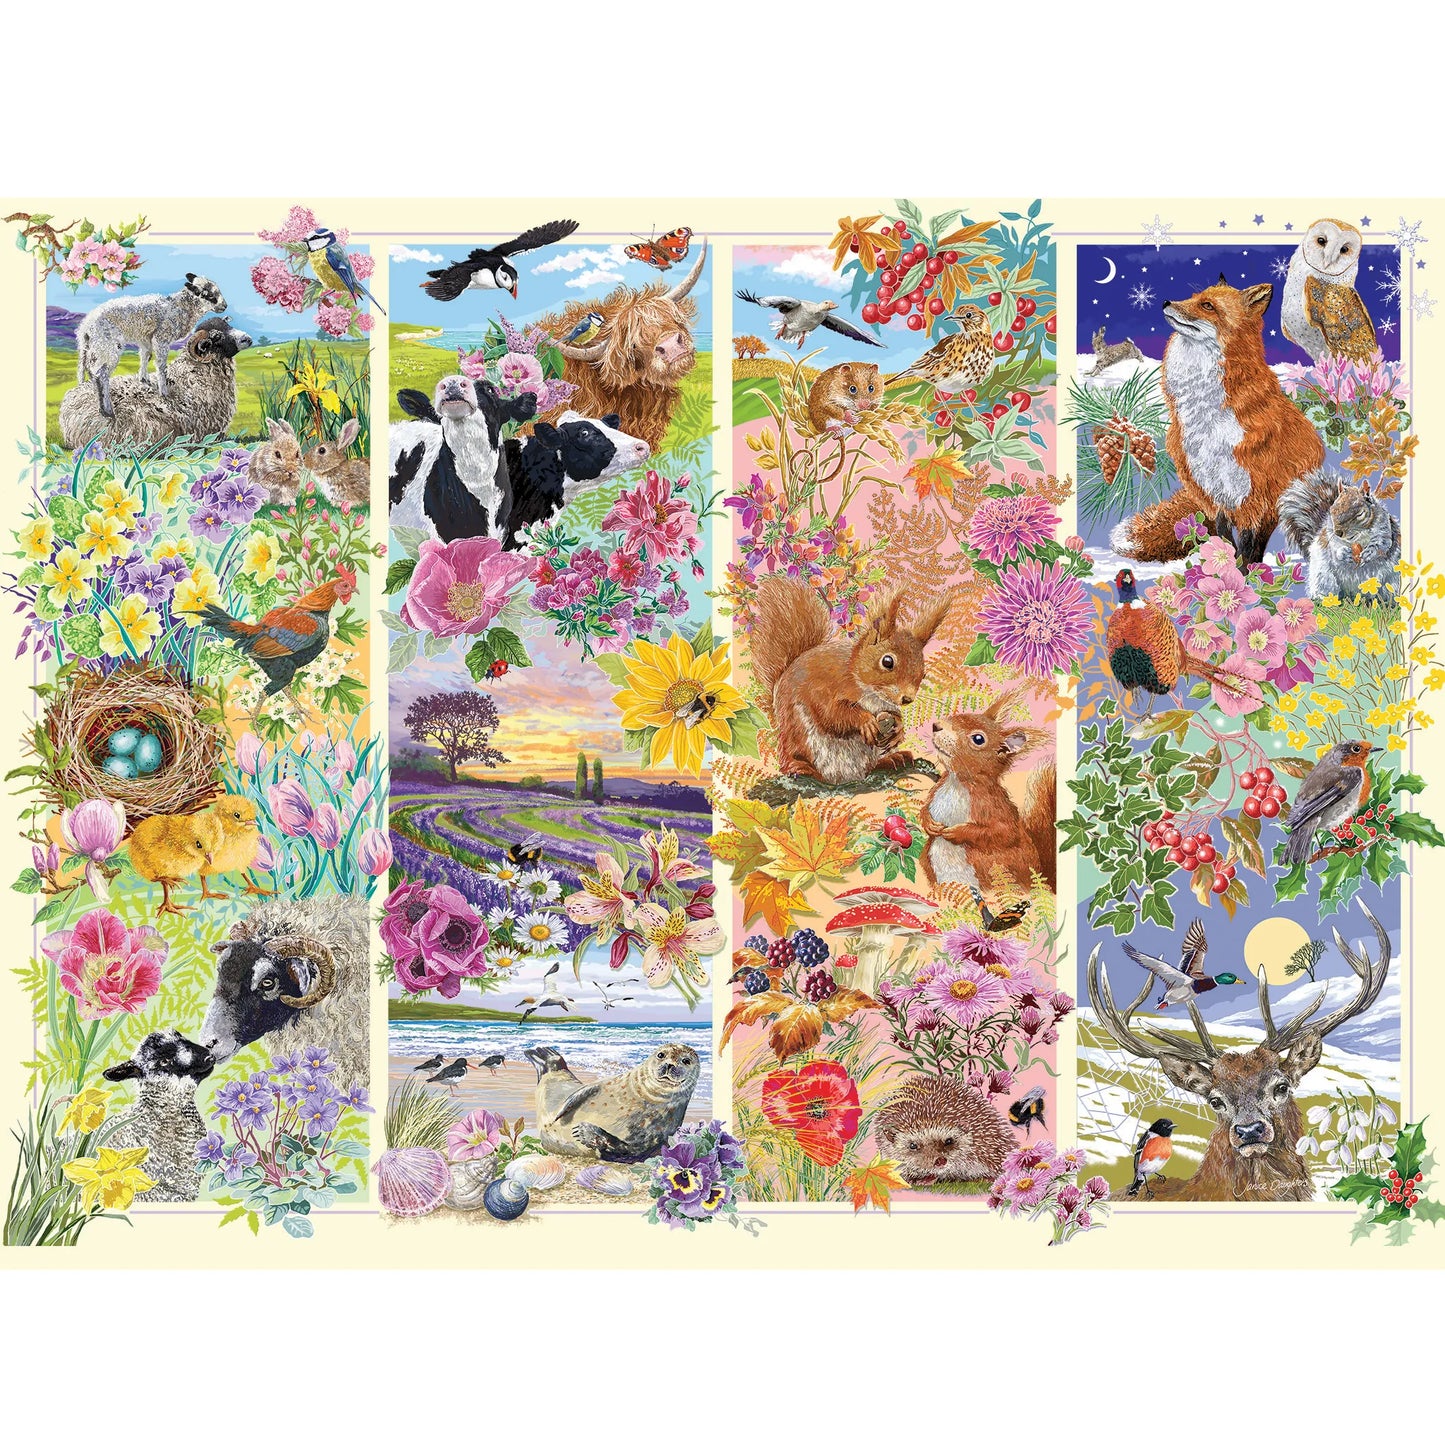 Gibsons - Through the Seasons  - 1000 Piece Jigsaw Puzzle